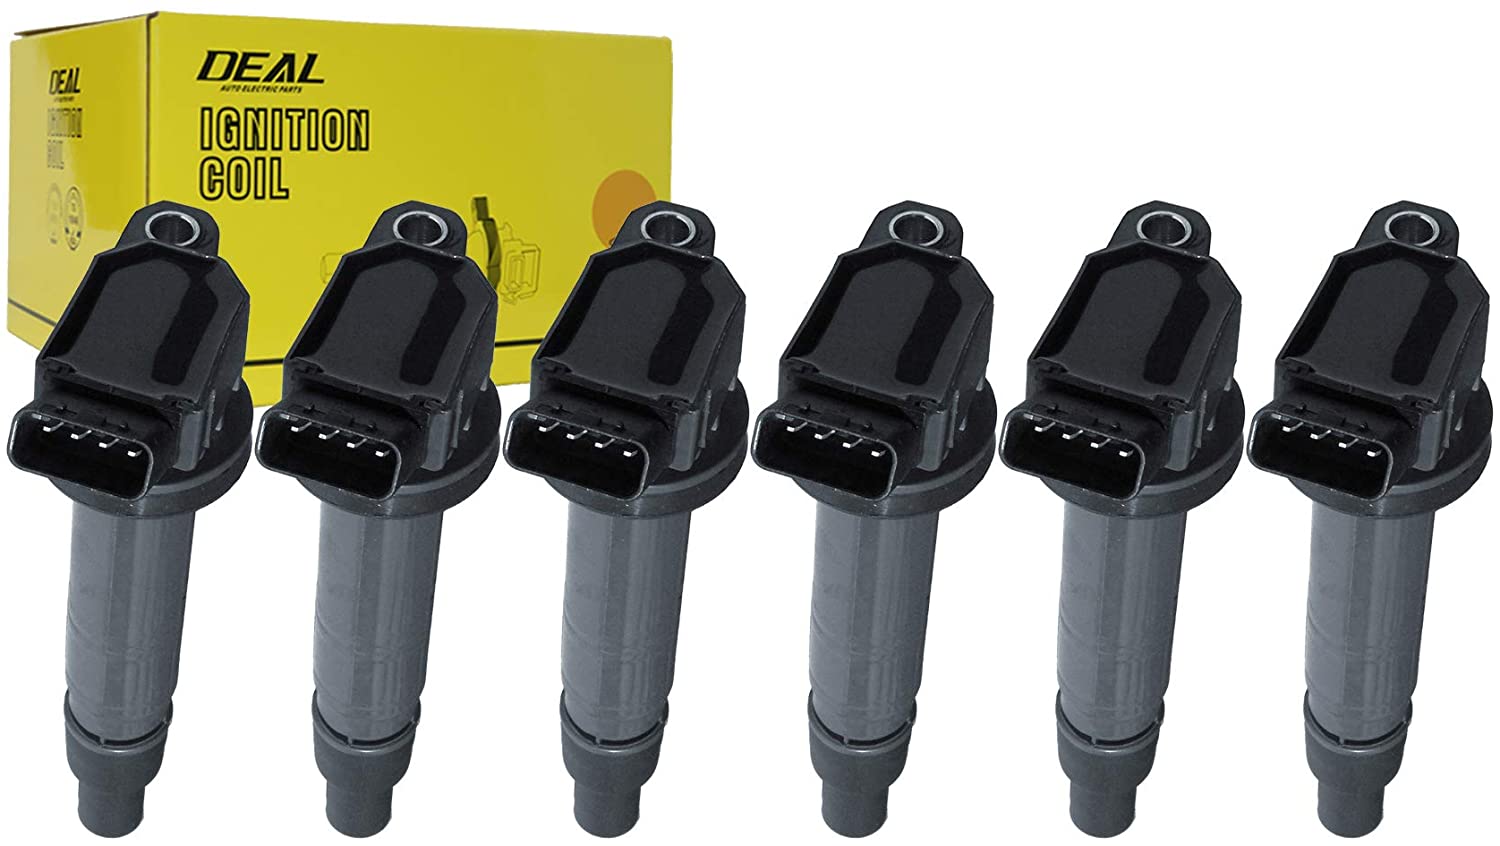 DEAL Pack of 6 New Ignition Coils For Scion xB - Toyota Tacoma Tundra 4Runner SR5 Camry Solara FJ Cruiser - Lexus IS F/RC F/GS F 2.4L 2.7L L4 4.0L V6 5.0L V8 Replacement# UF495 C1426 5C1419